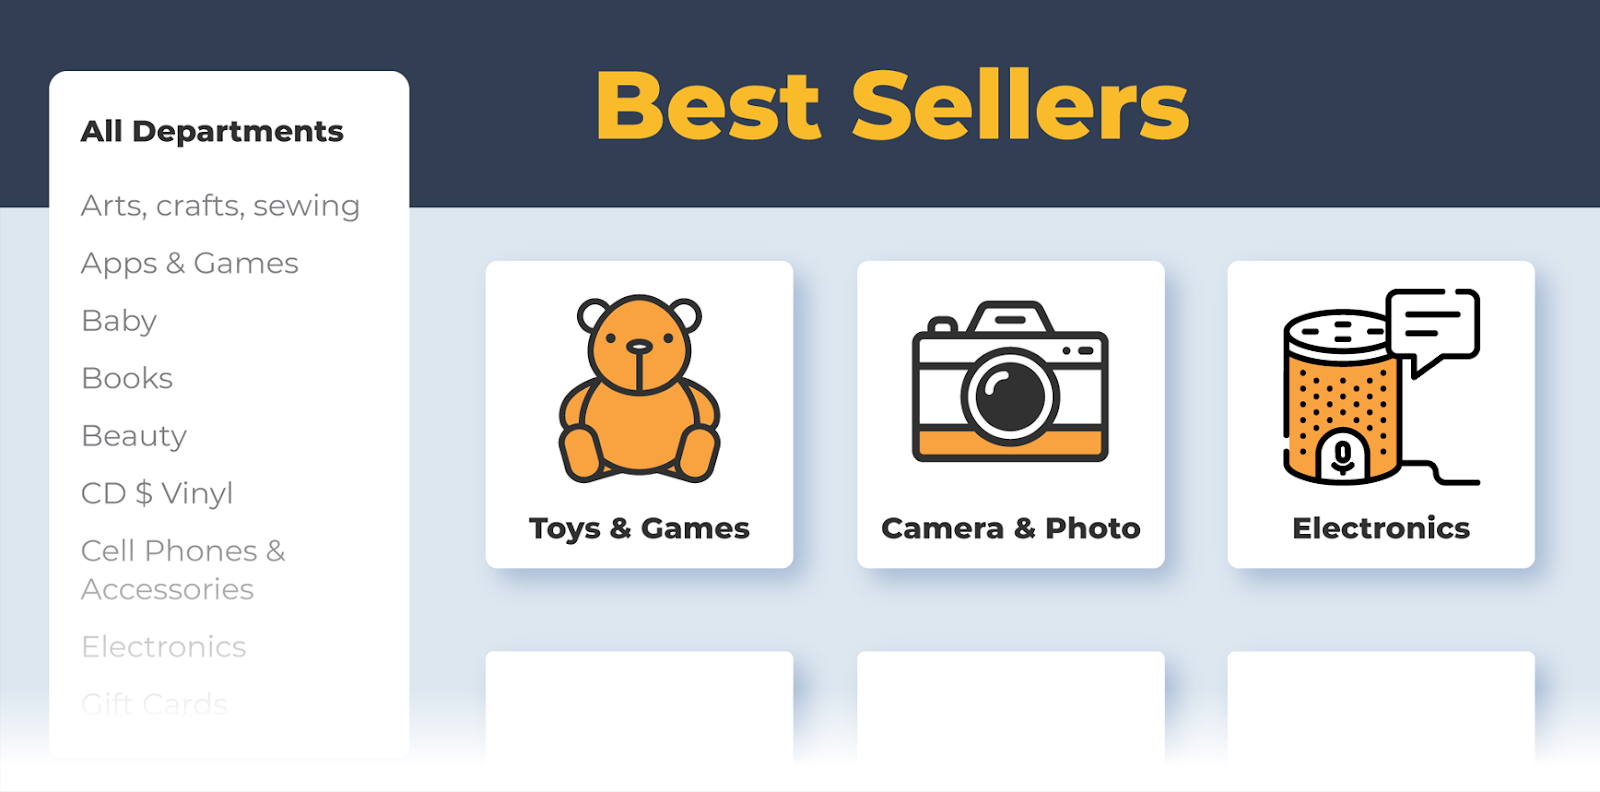 Best Product Pages